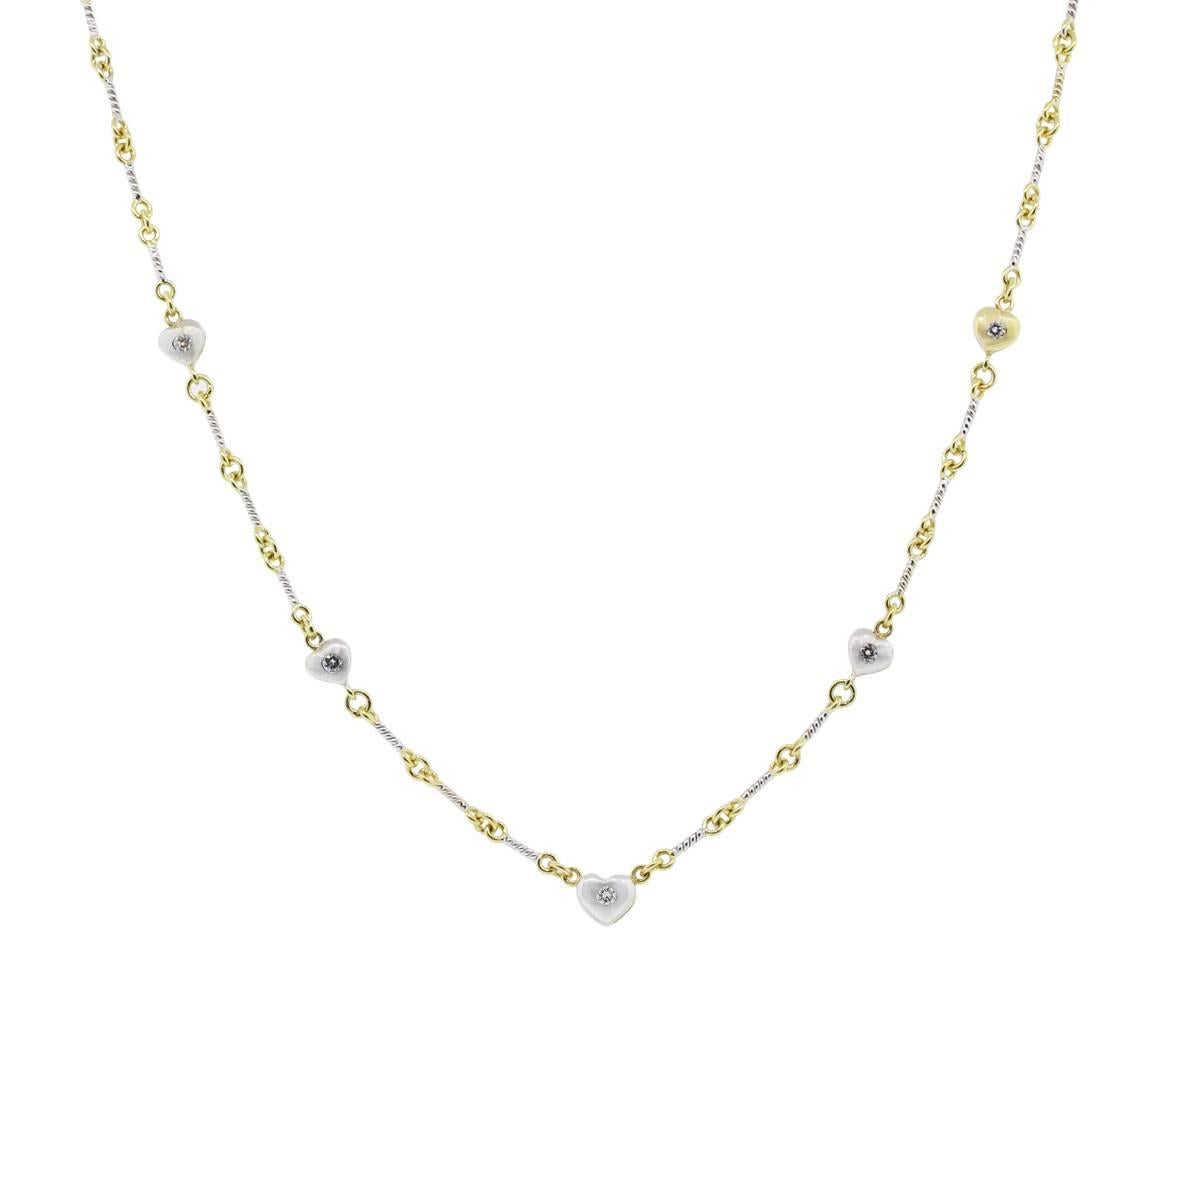 Designer: Gregg Ruth
Style: 18k Two Tone 0.40ctw Diamond Heart Stationary Necklace
Length: Necklace is 19